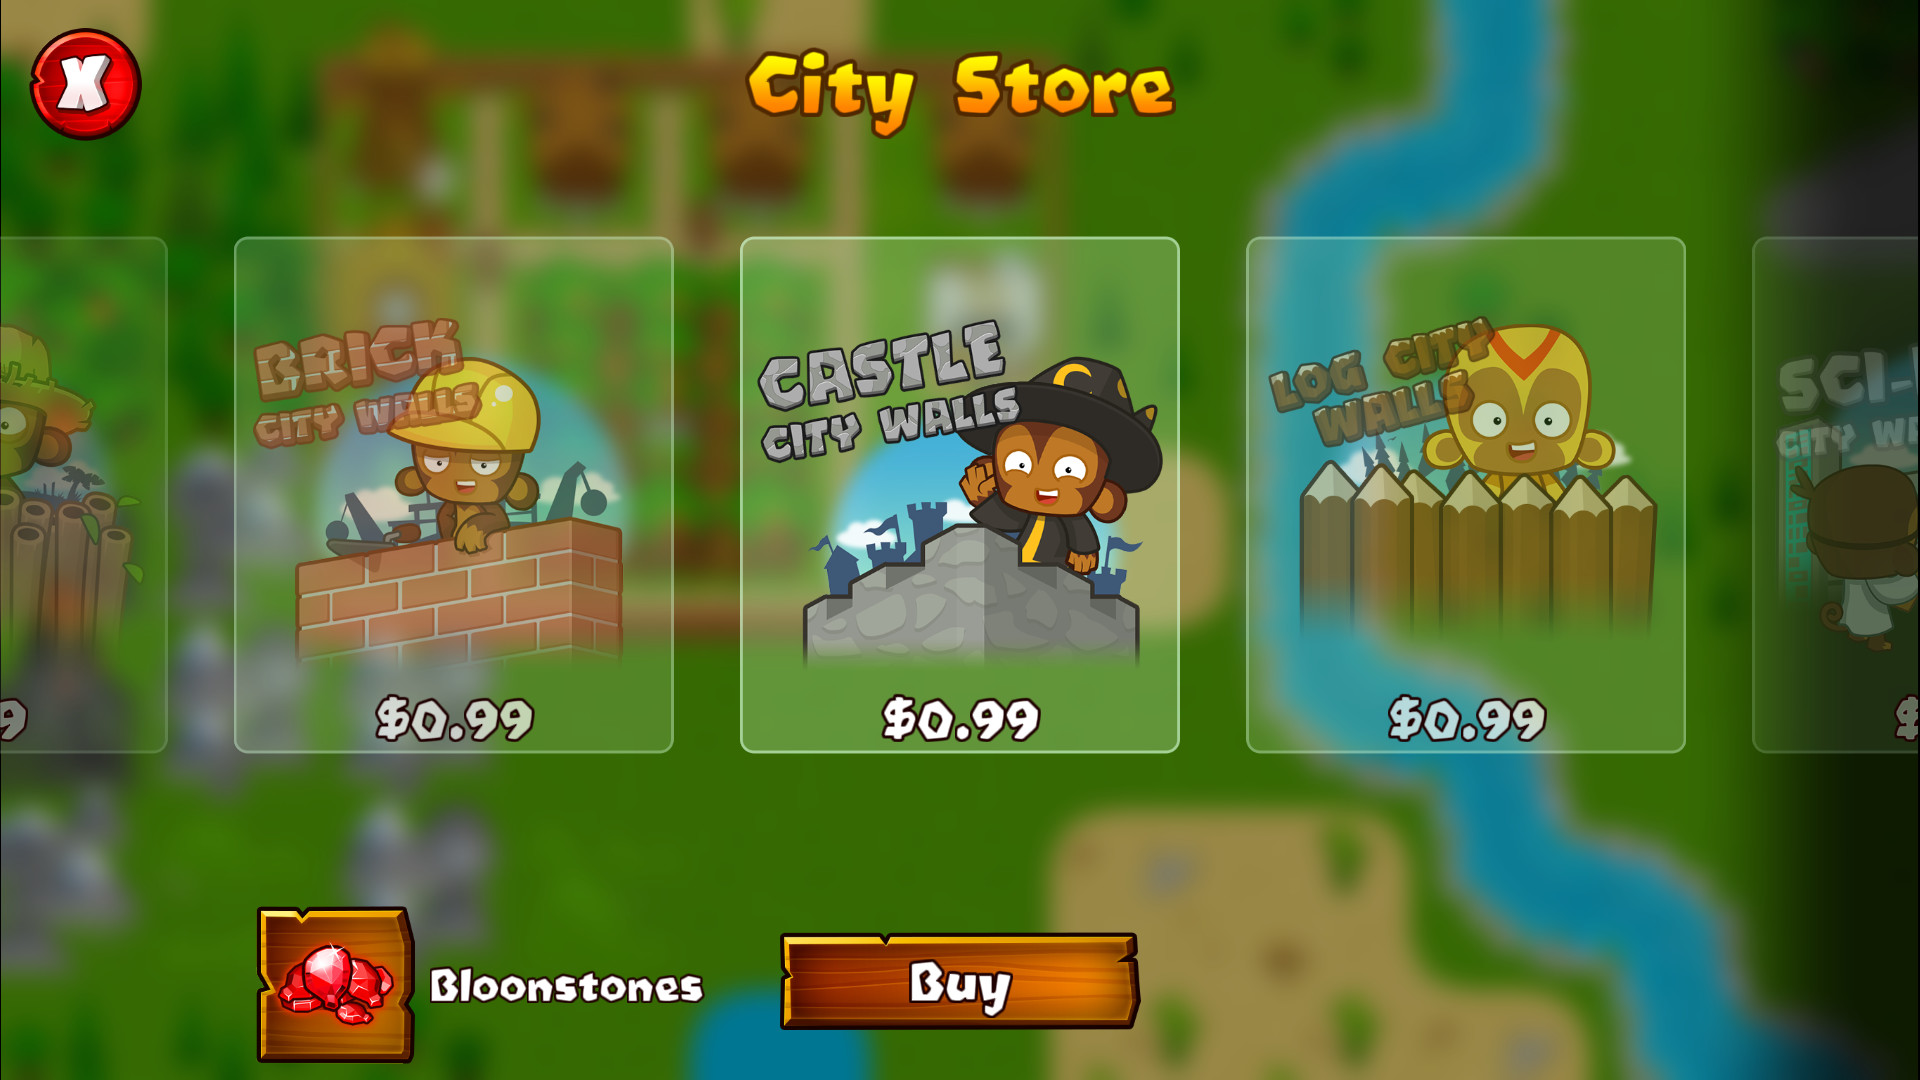 Bloons Monkey City - Castle City Walls Featured Screenshot #1